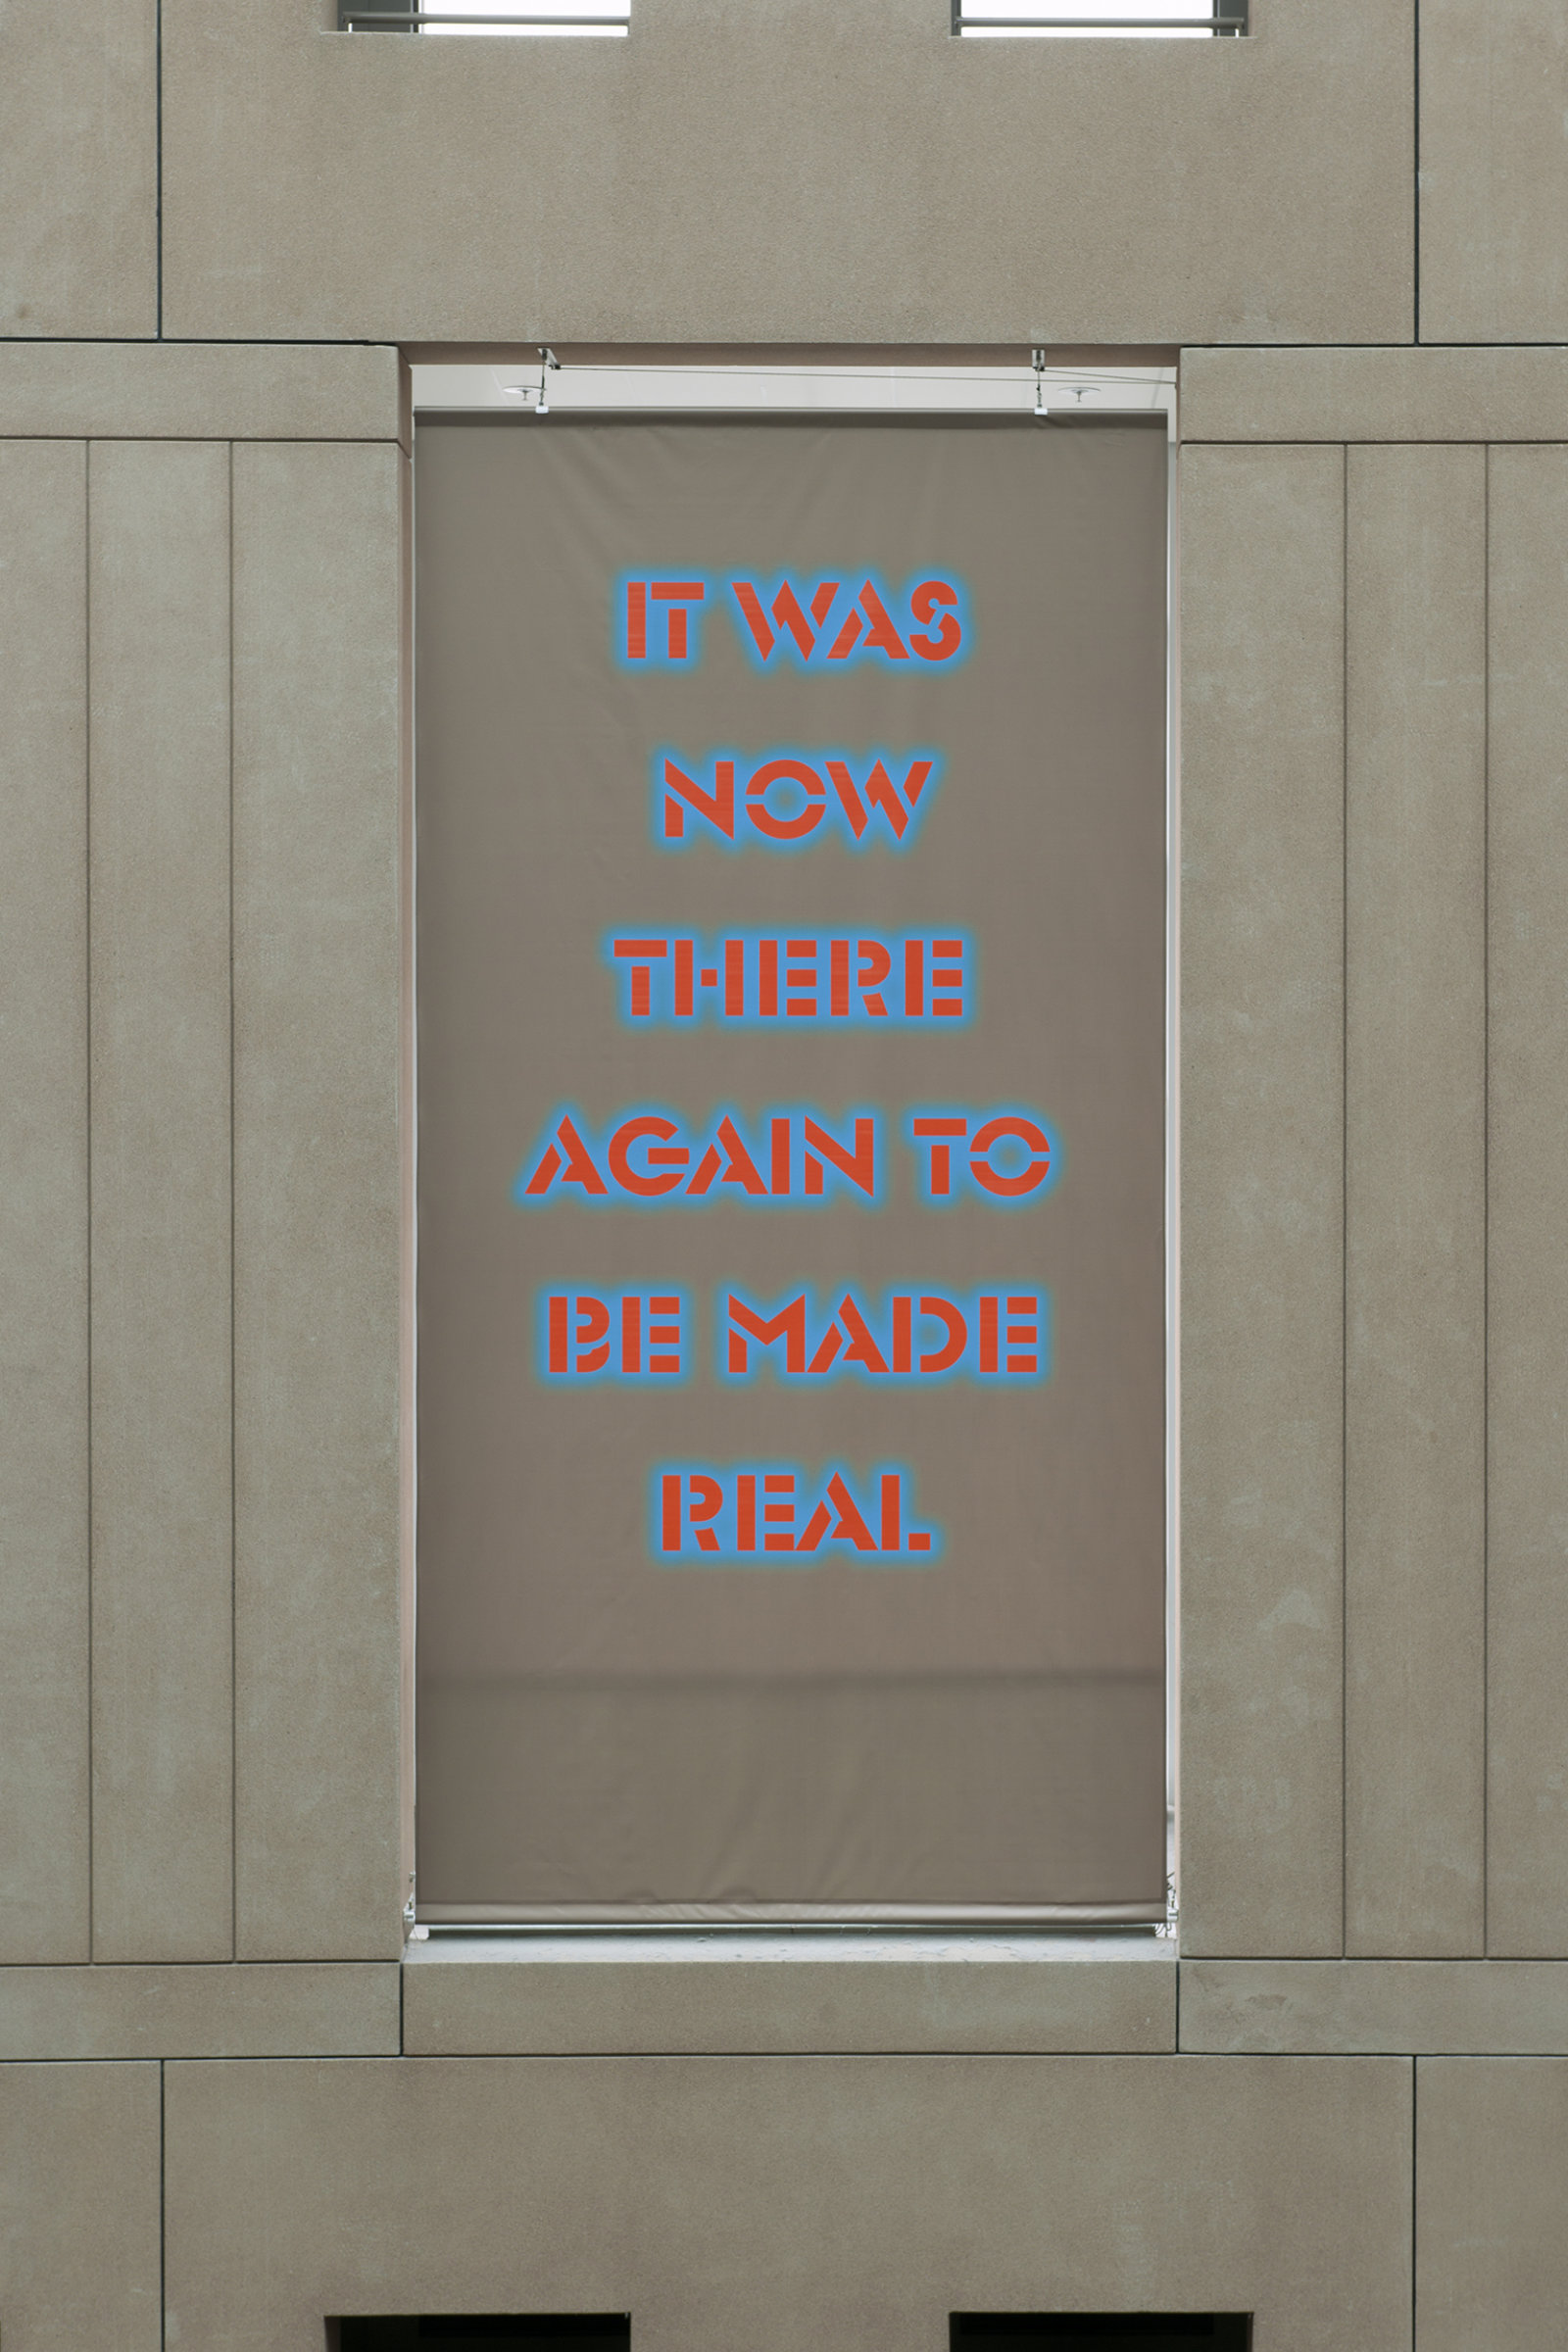 Raymond Boisjoly, Contingent Matters, 2011, vinyl banner, 240 x 120 in. (610 x 305 cm). Installation view, The Aperture Project, Vancouver Public Library, 2011